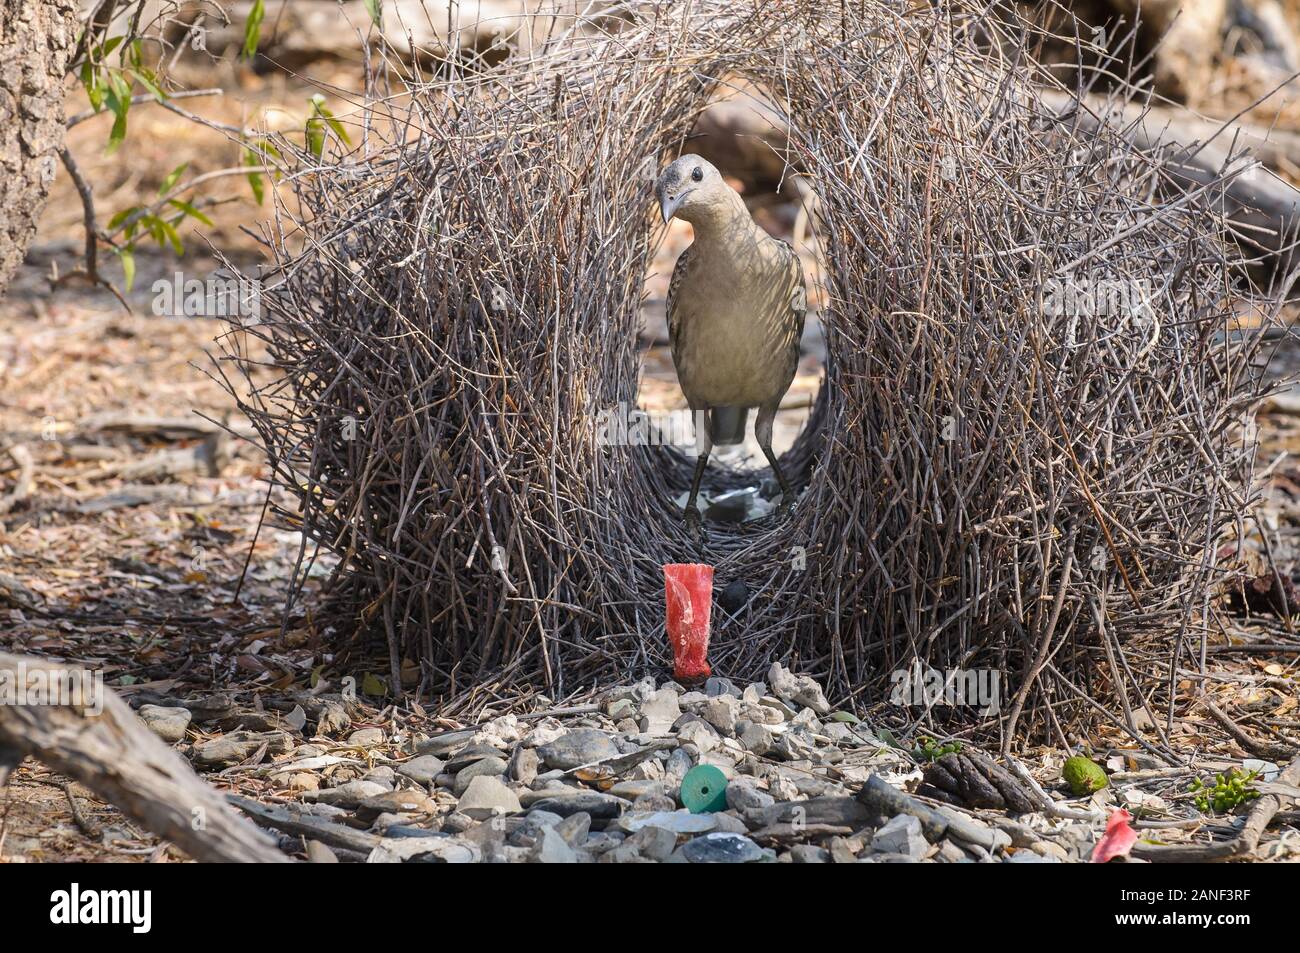 Great Bowerbird standing in his bower looking at red shotgun cartridge in bower's entrance. Stock Photo